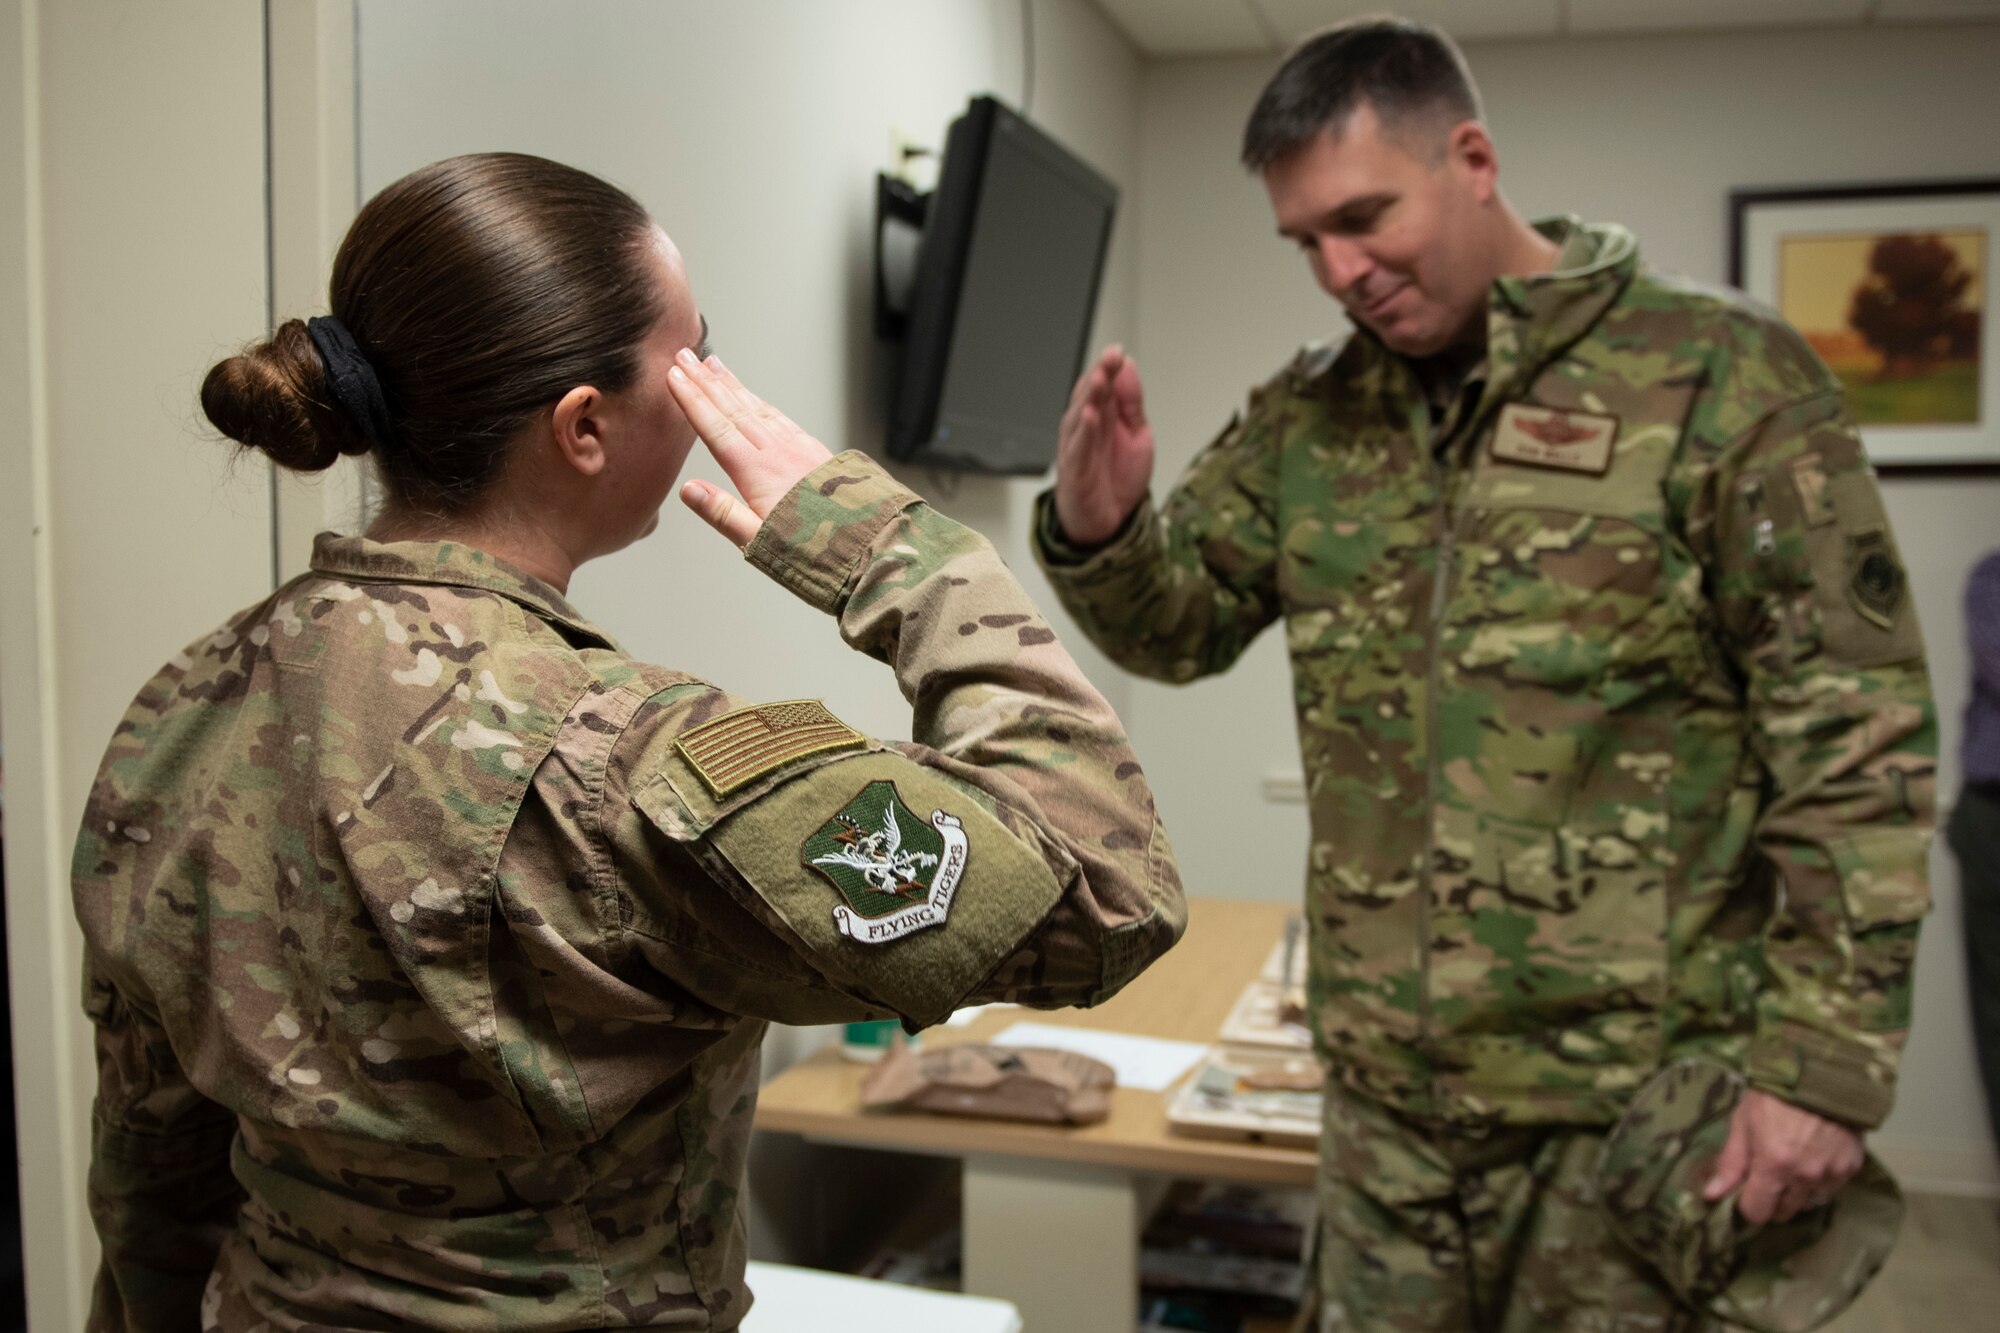 A photo of an Airman saluting leadership after getting coined.